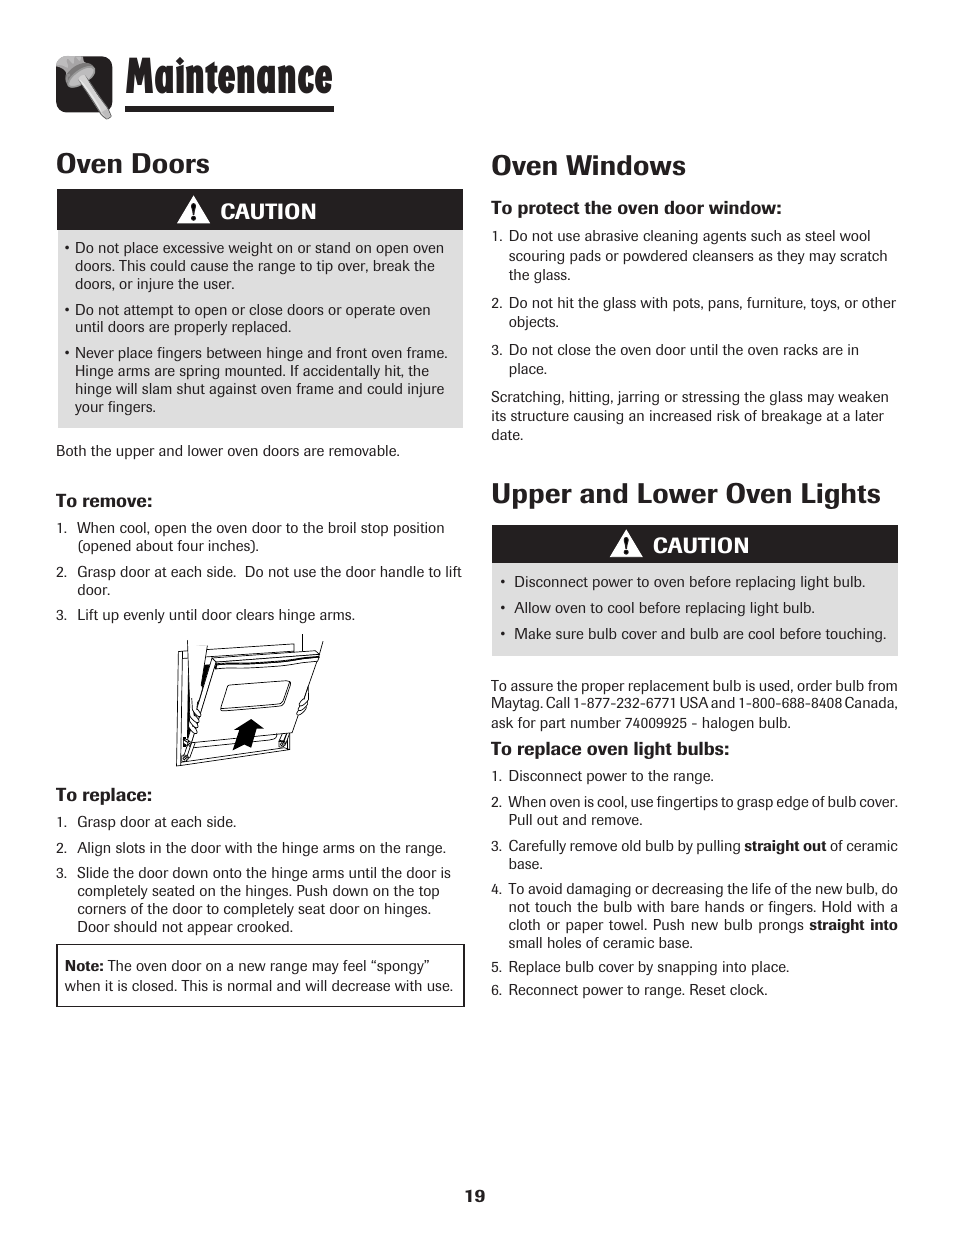 Maintenance, Oven doors oven windows, Upper and lower oven lights | Caution | Maytag MGR6751BDW User Manual | Page 20 / 76